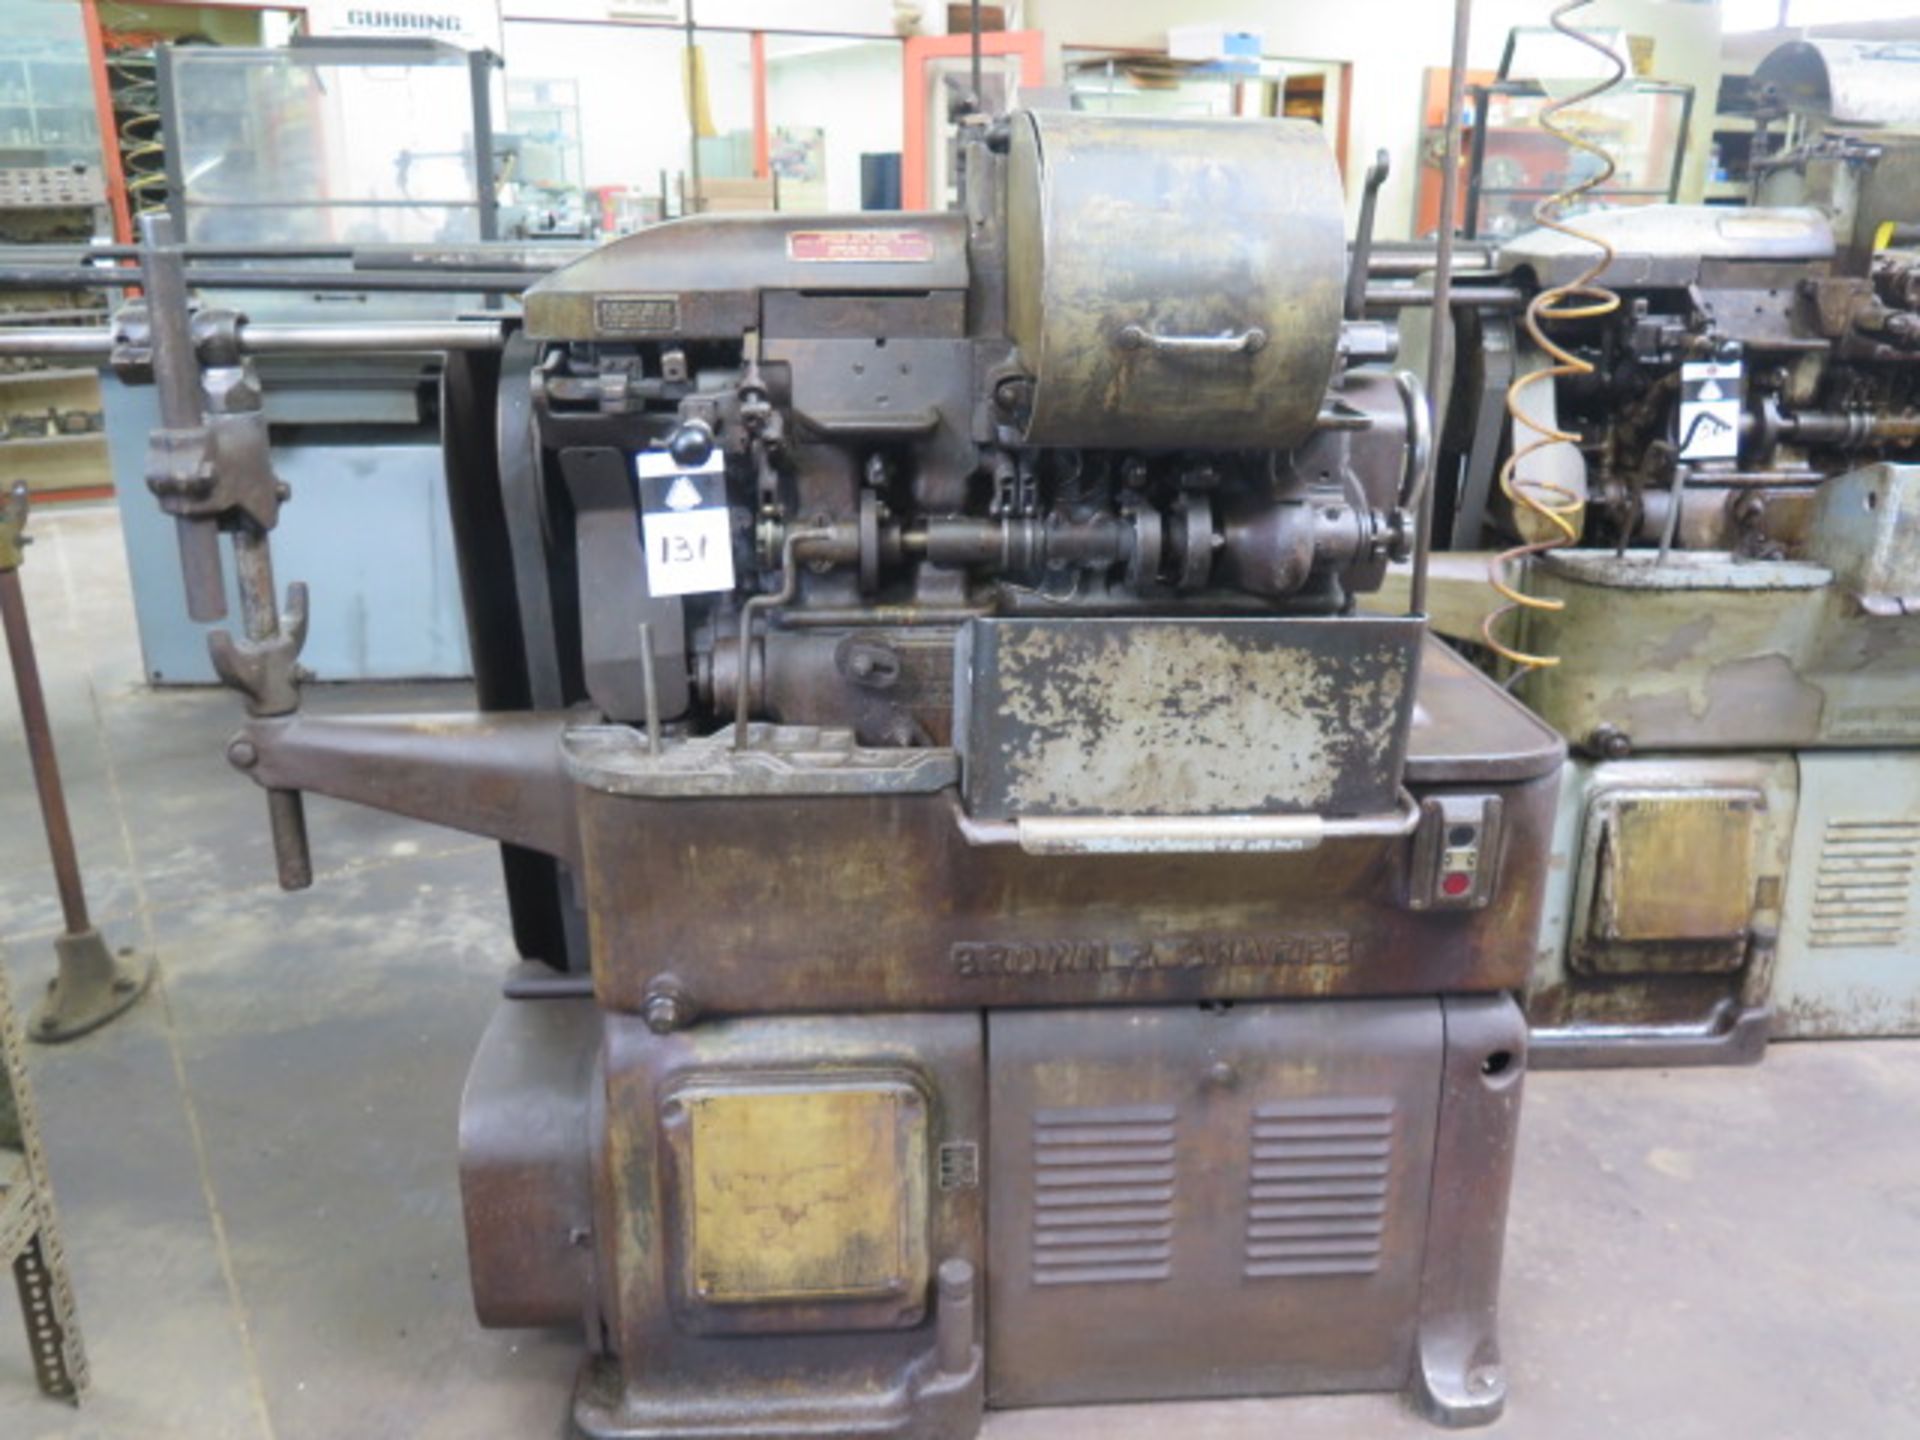 Brown & Sharpe No. 00G ½” Automatic Screw Machine s/n 542-00-749 w/ 6-Station SOLD AS IS